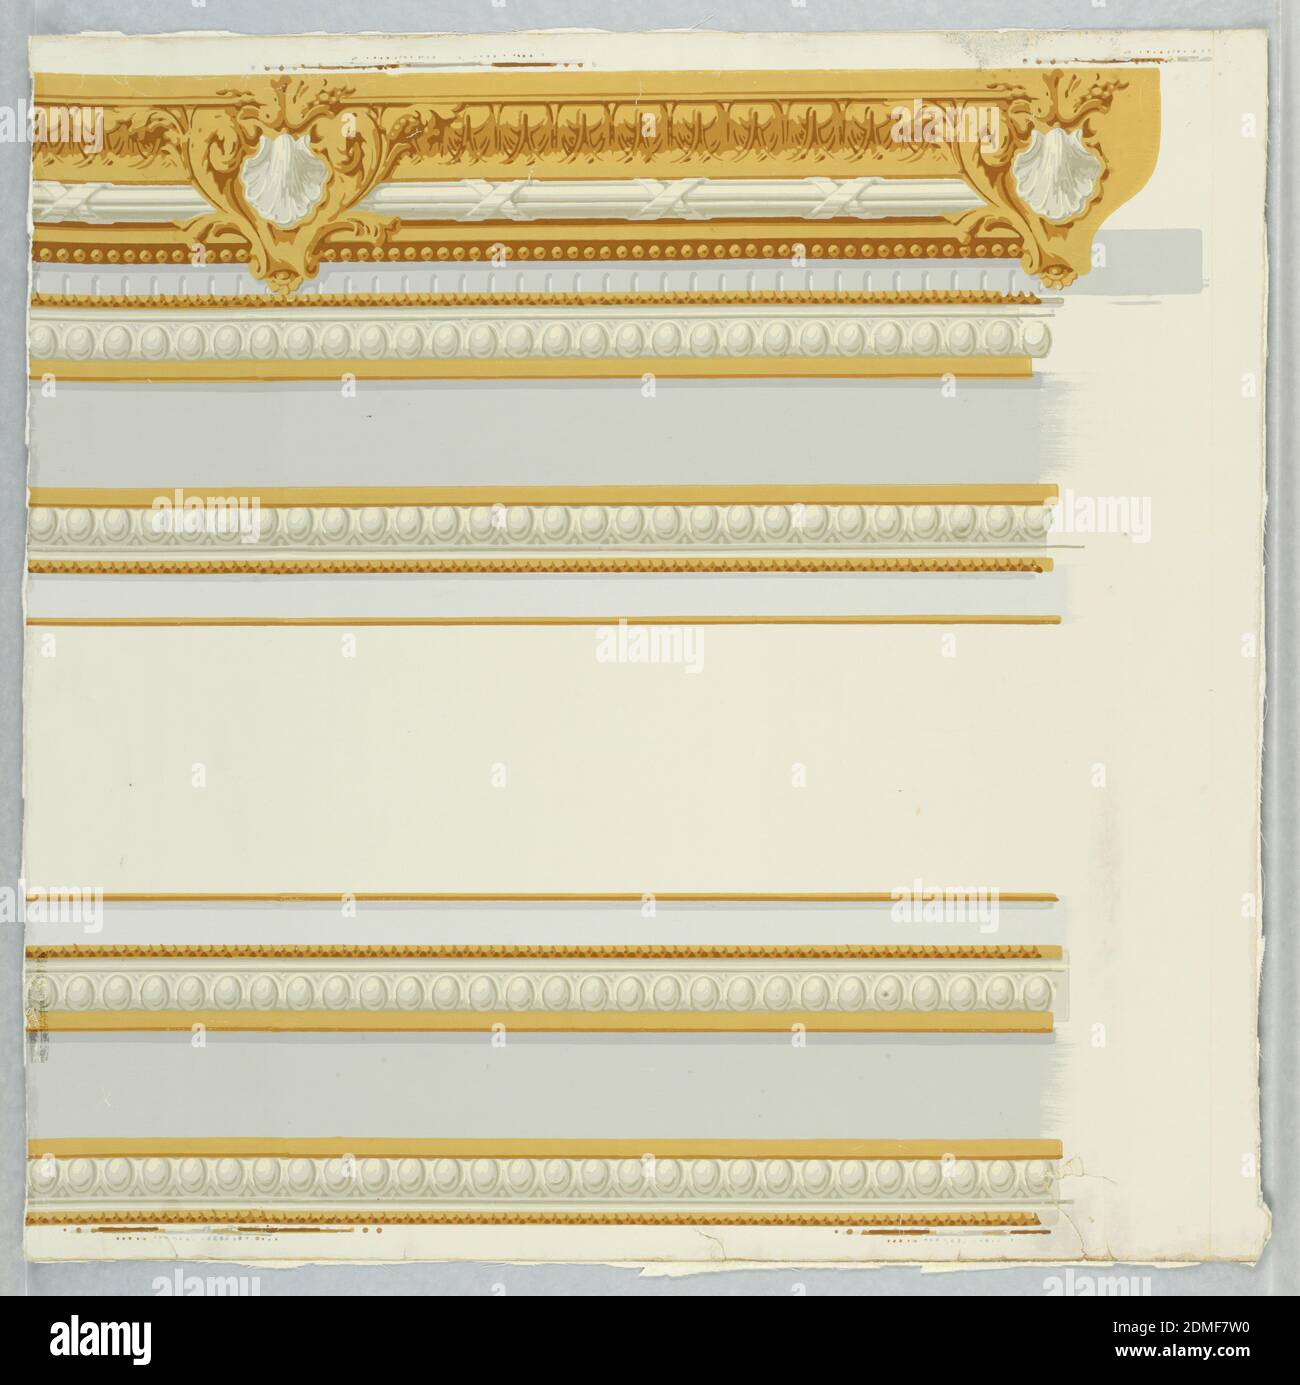 Louis XVI or Trianon, Jules Desfossé, French, active 1851 - 1863, Block-printed paper, Two separate motifs to be used for dado. The baseboard has a series of horizontal molding strips in grisaille and brownish-yellow. The upper element, or chair rail, has a more elaborate treatment with leafy carving and a grisaille shell motif in addition to the molding strips; on off-white ground., Paris, France, 1851–65, Wallcoverings, Border, Border Stock Photo